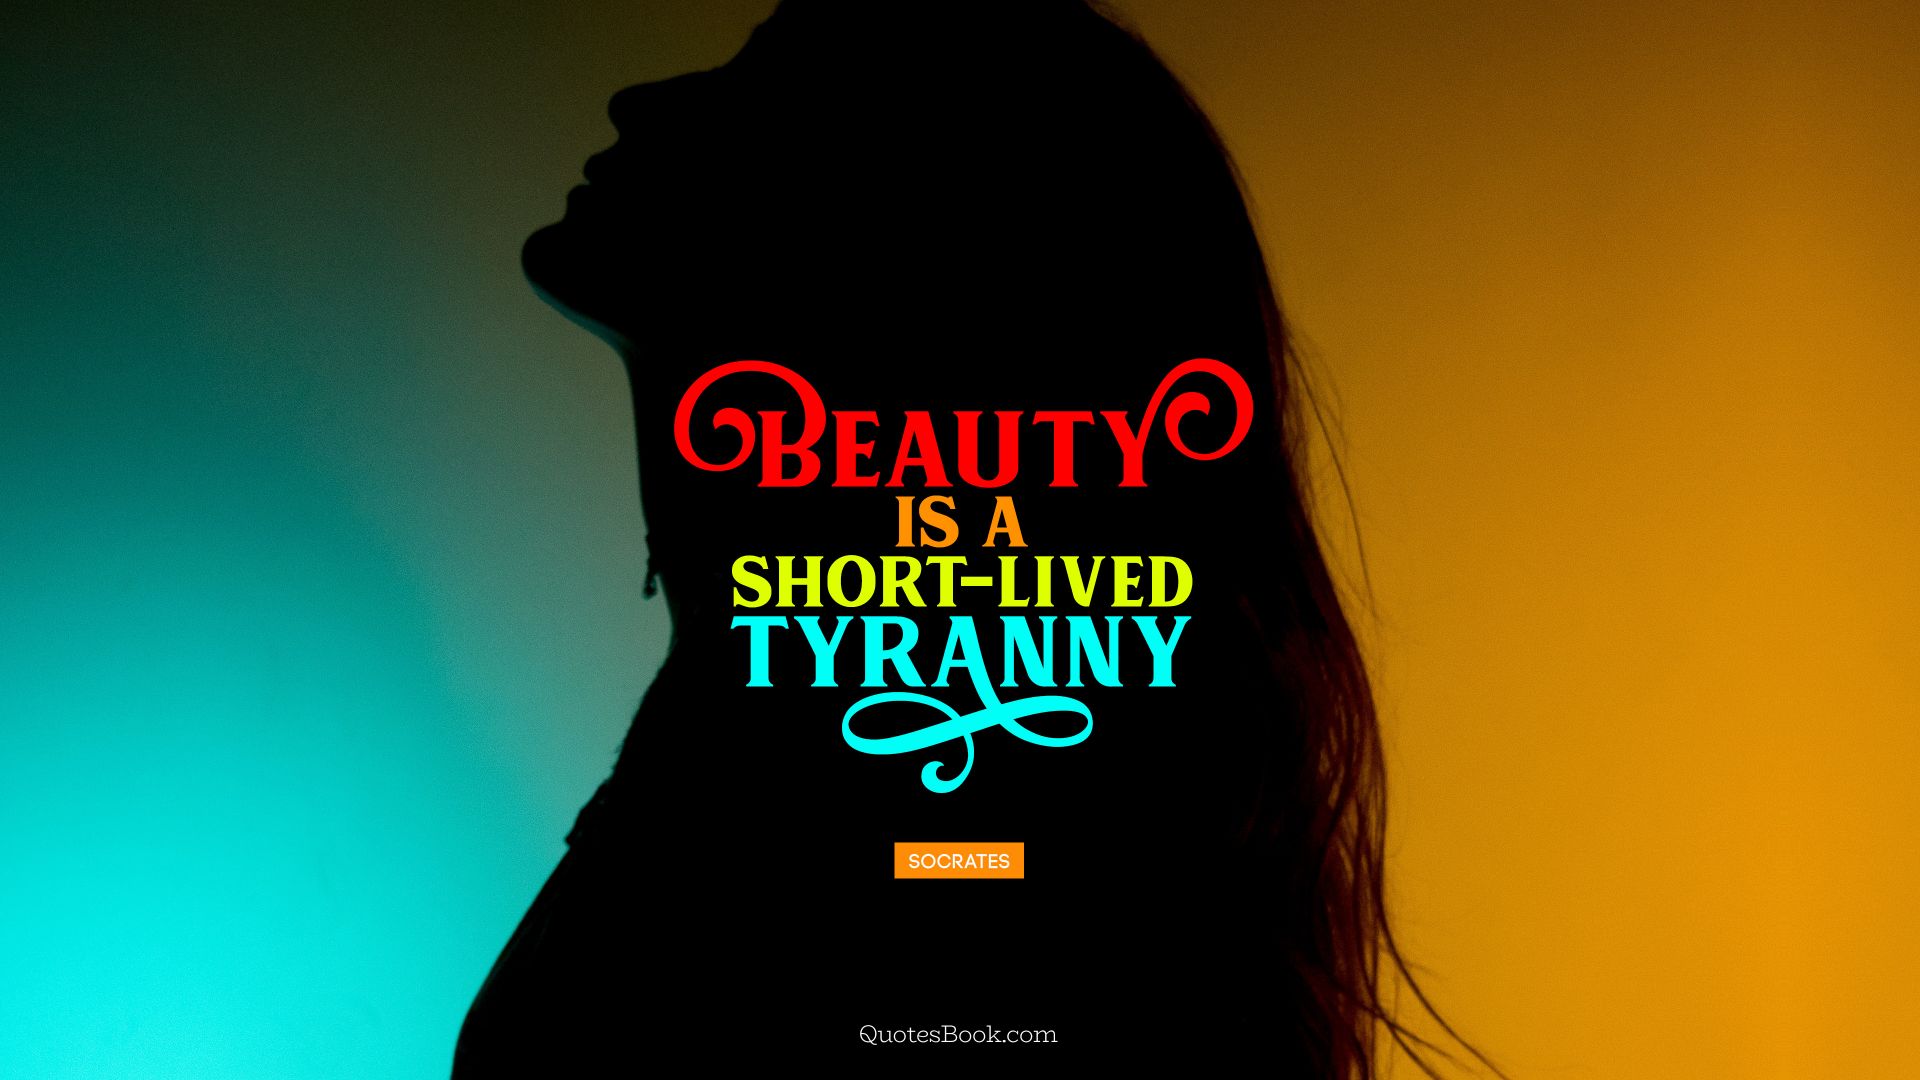 Beauty is a short-lived tyranny. - Quote by Socrates